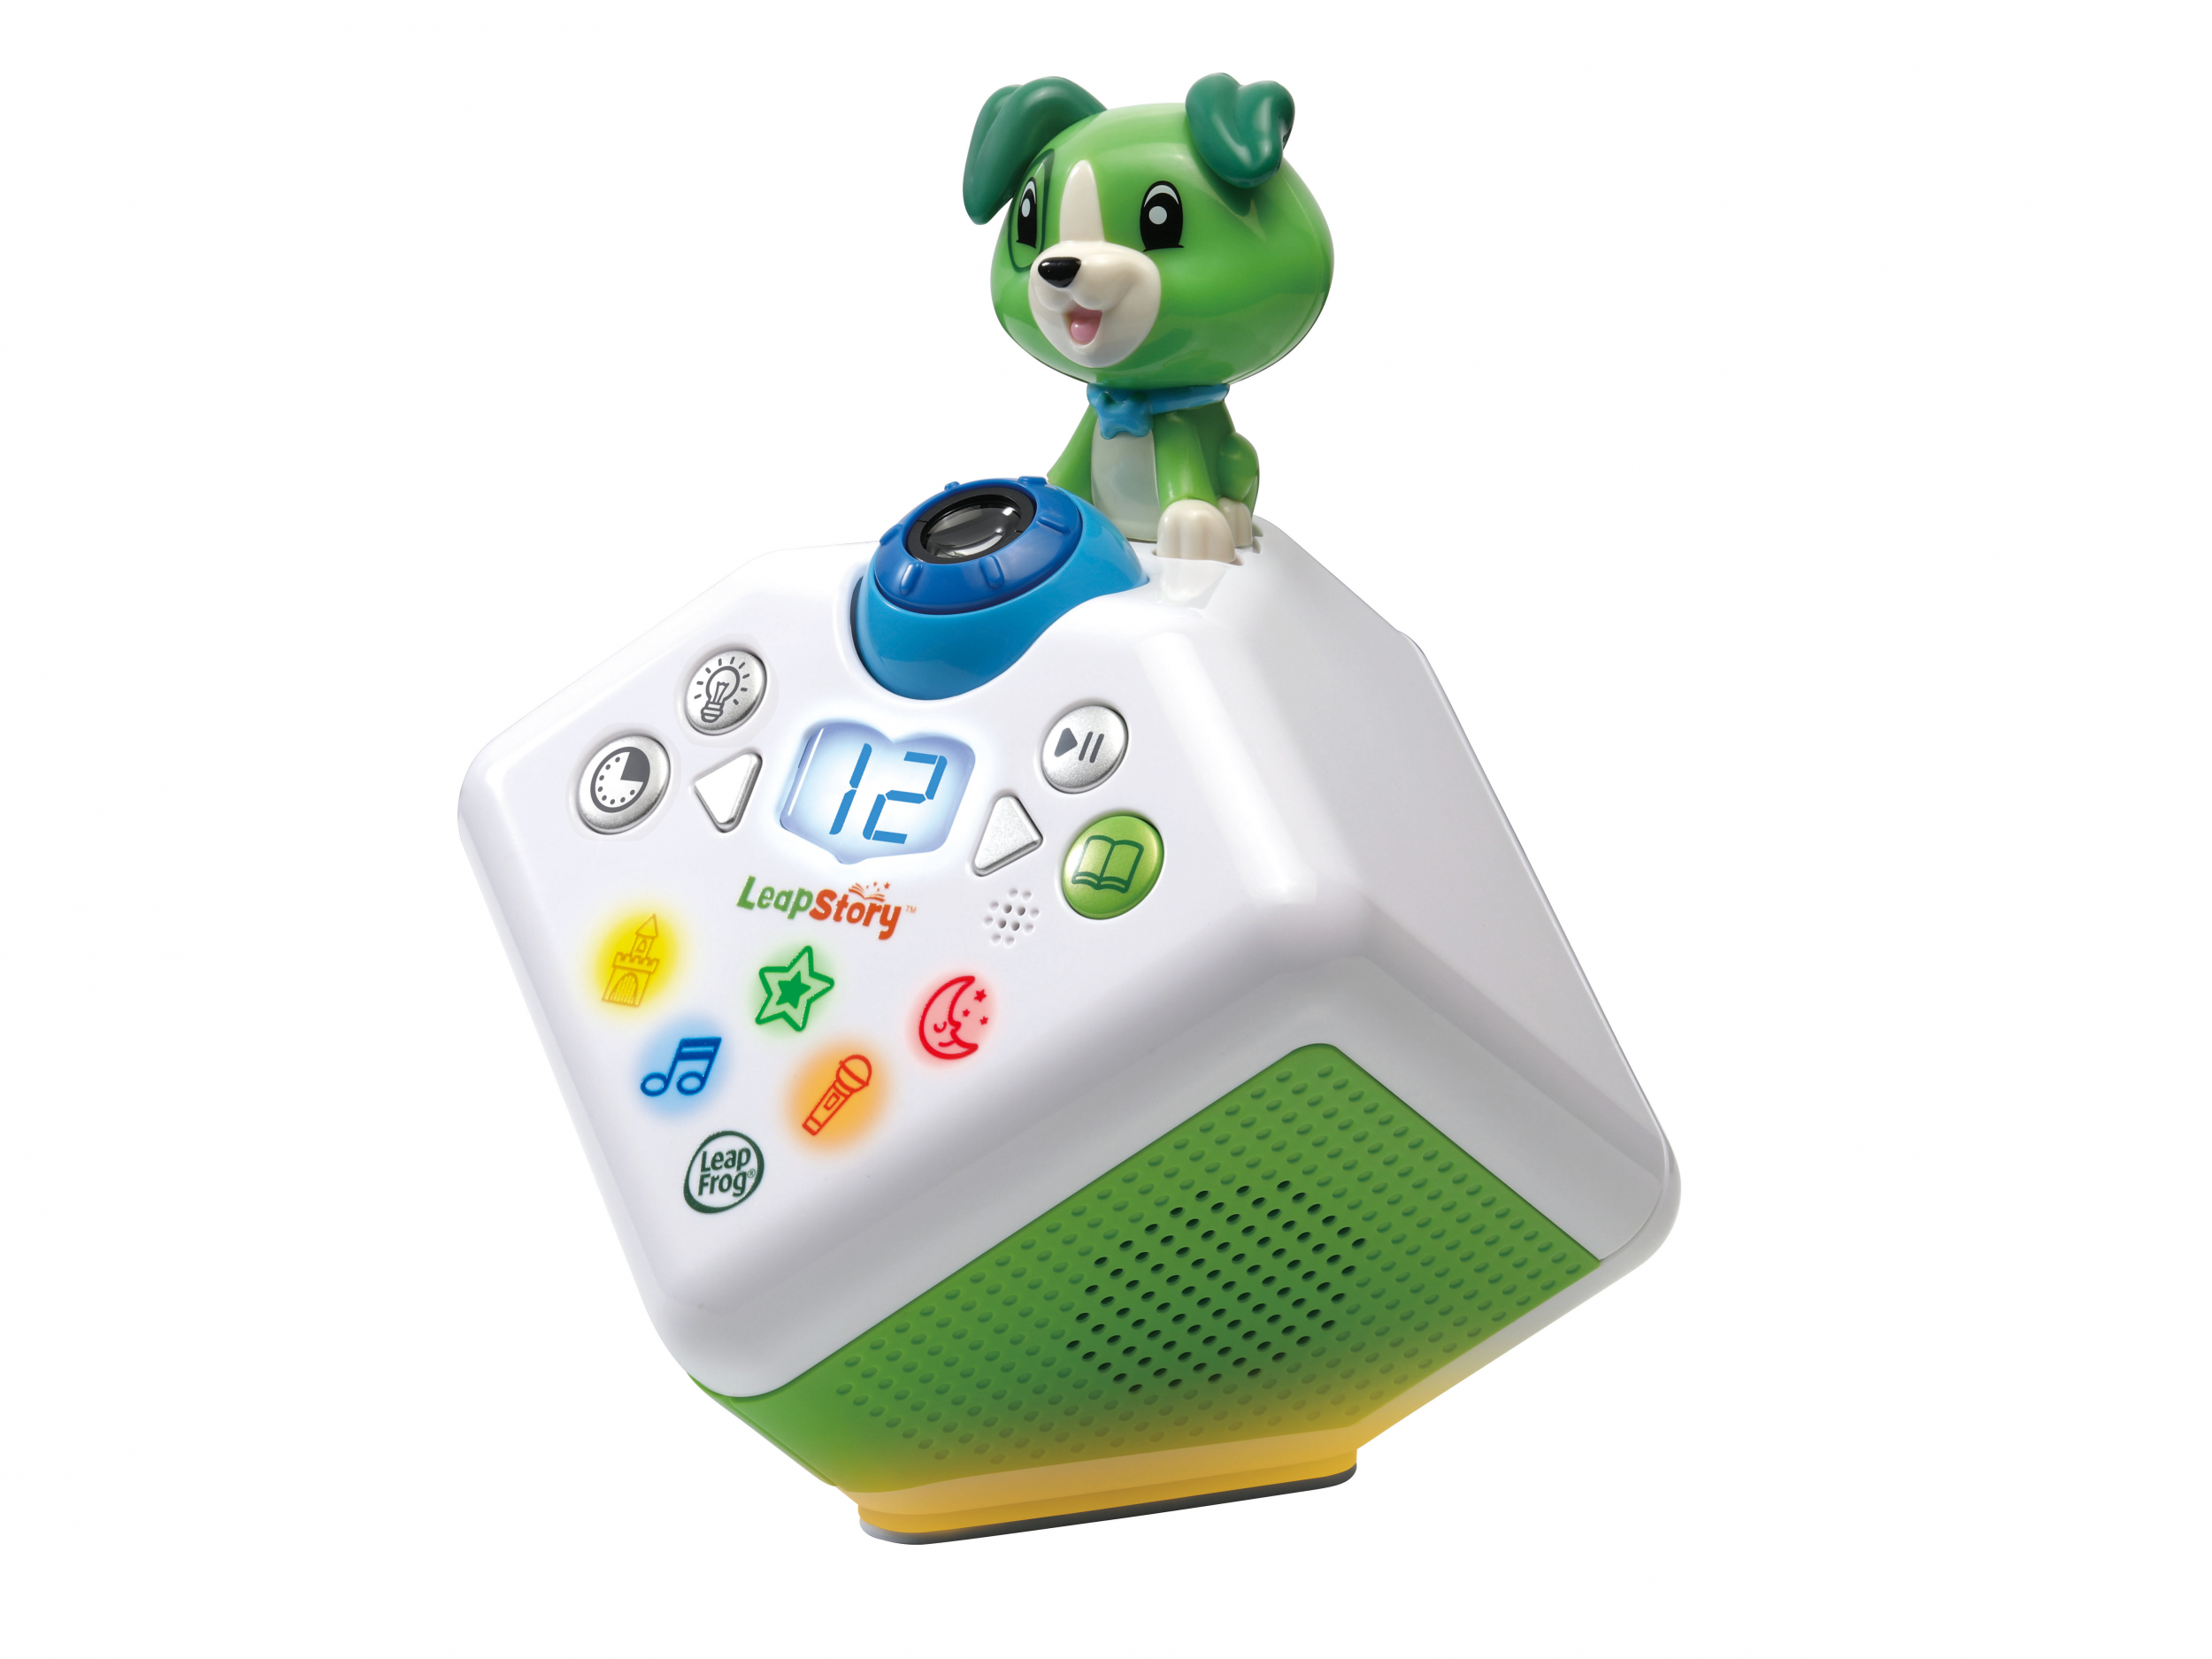 argos musical toys for babies